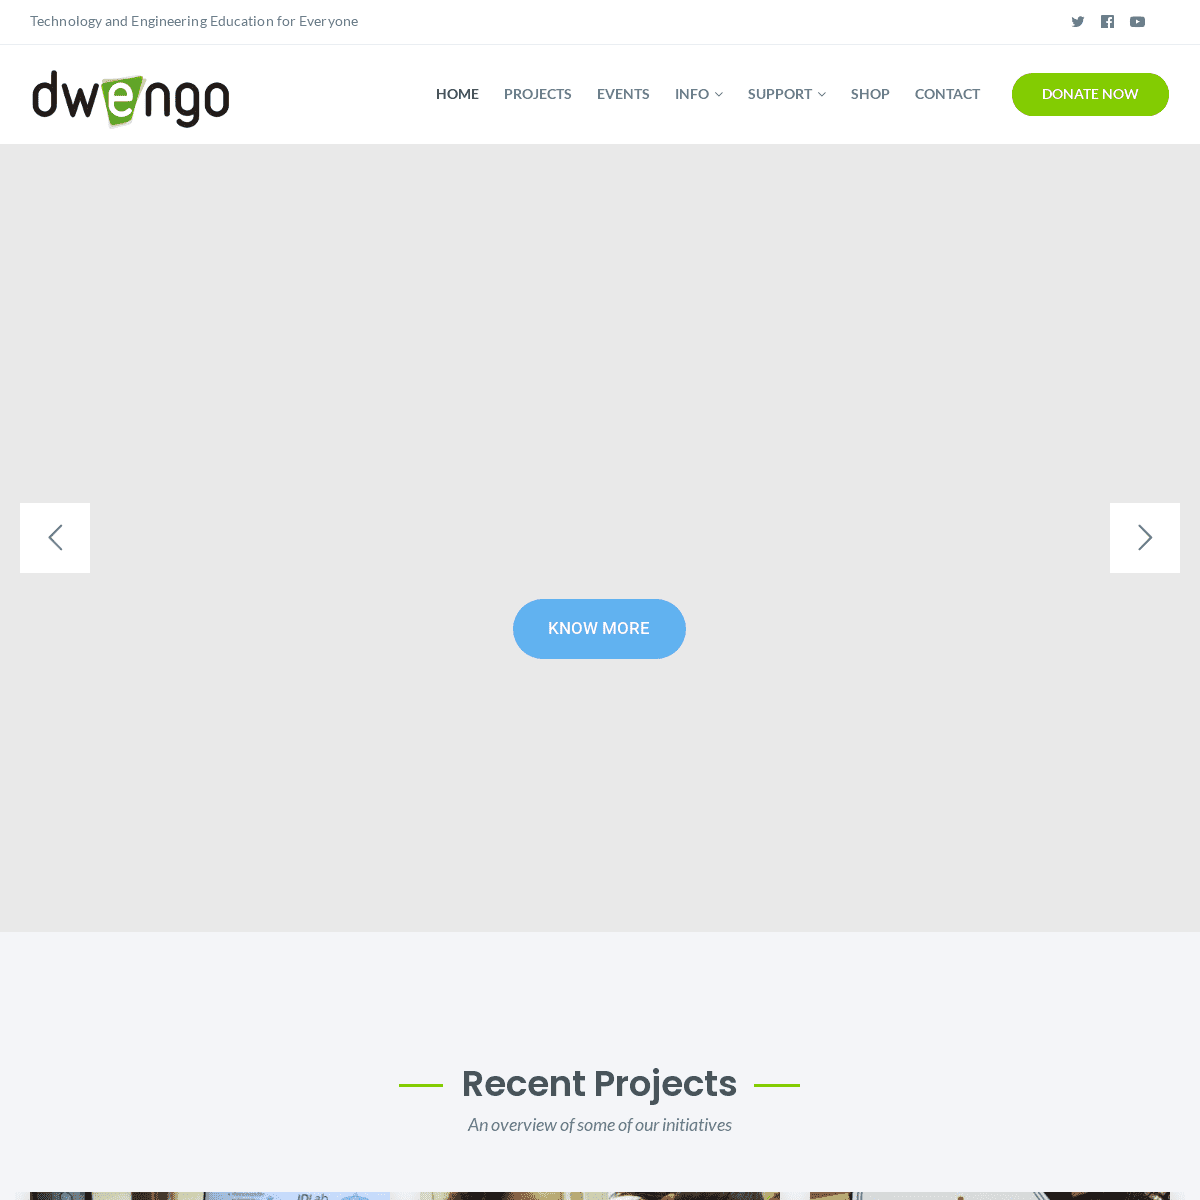 A complete backup of https://dwengo.org